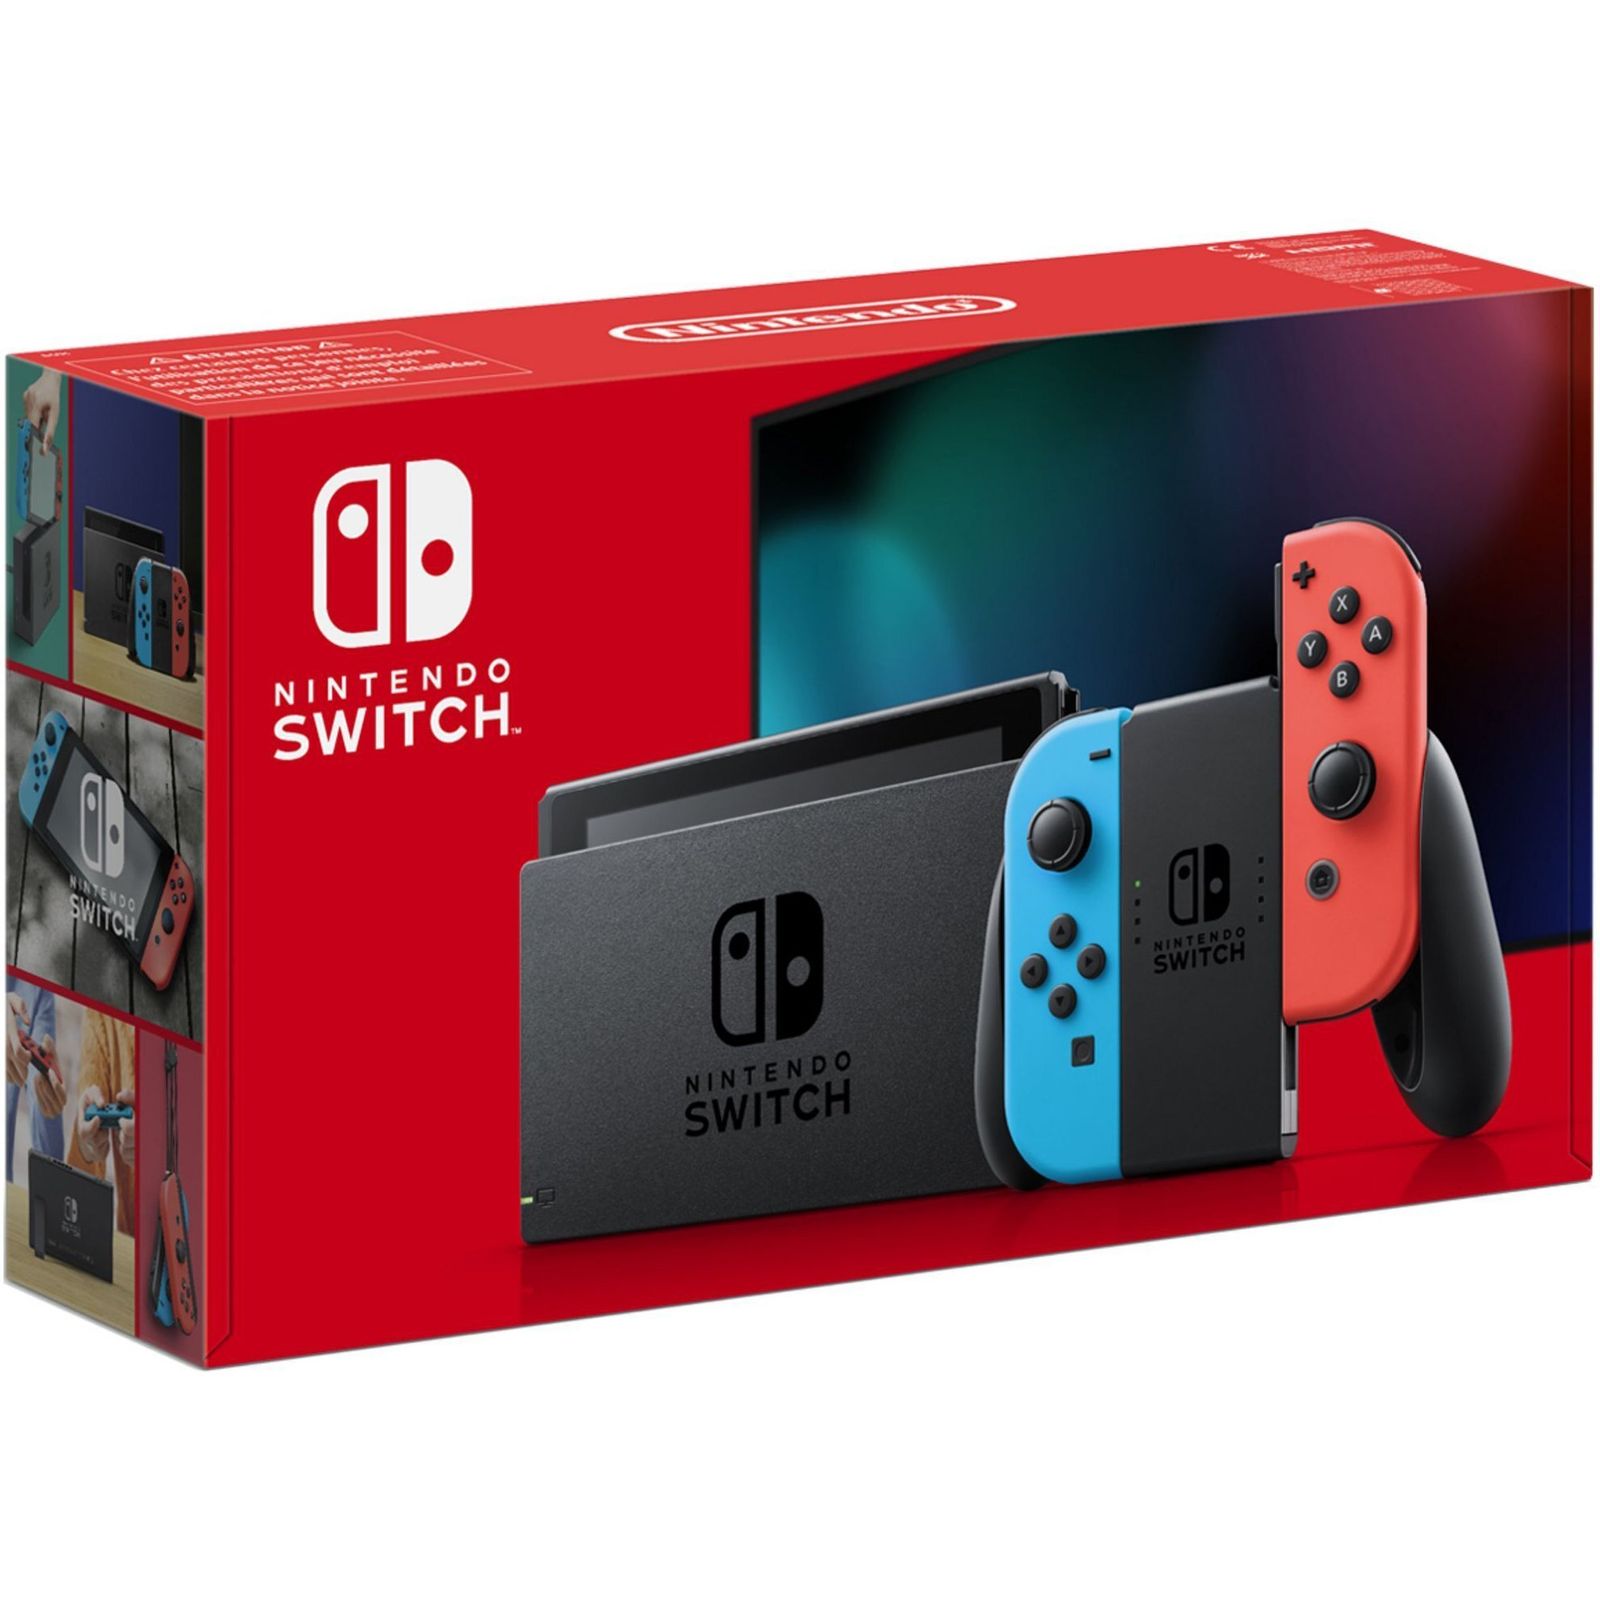 Nintendo Switch with Neon Blue and Neon Red Joy-Con